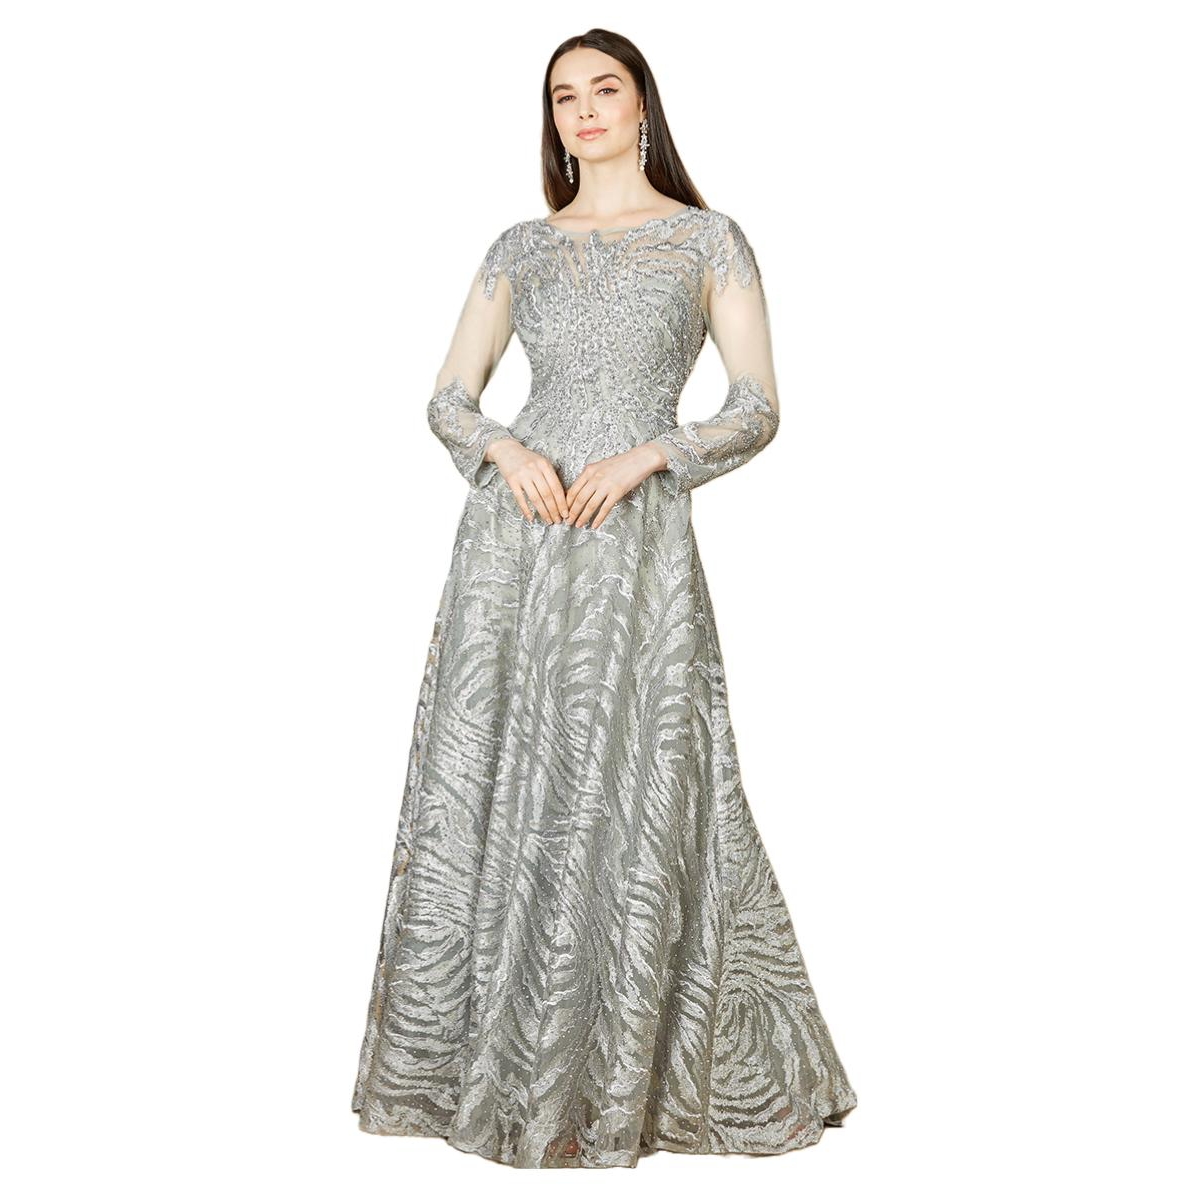 Women's Lara Lace Ball Gown with Long Sheer Sleeves - Slate